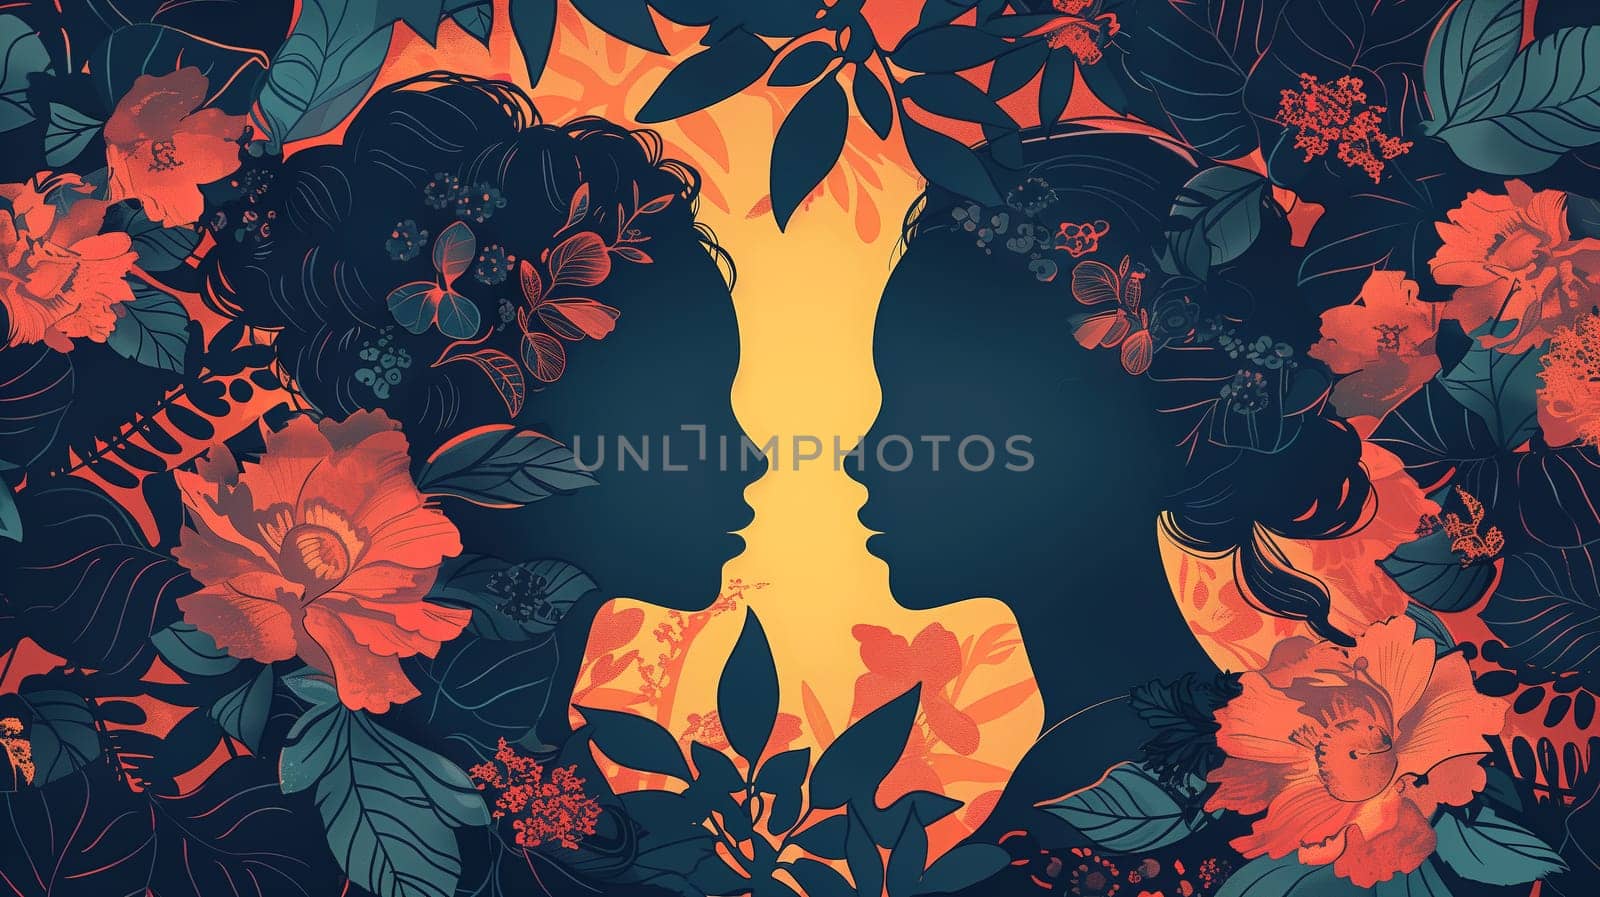 Womans Face Surrounded by Flowers and Leaves by TRMK